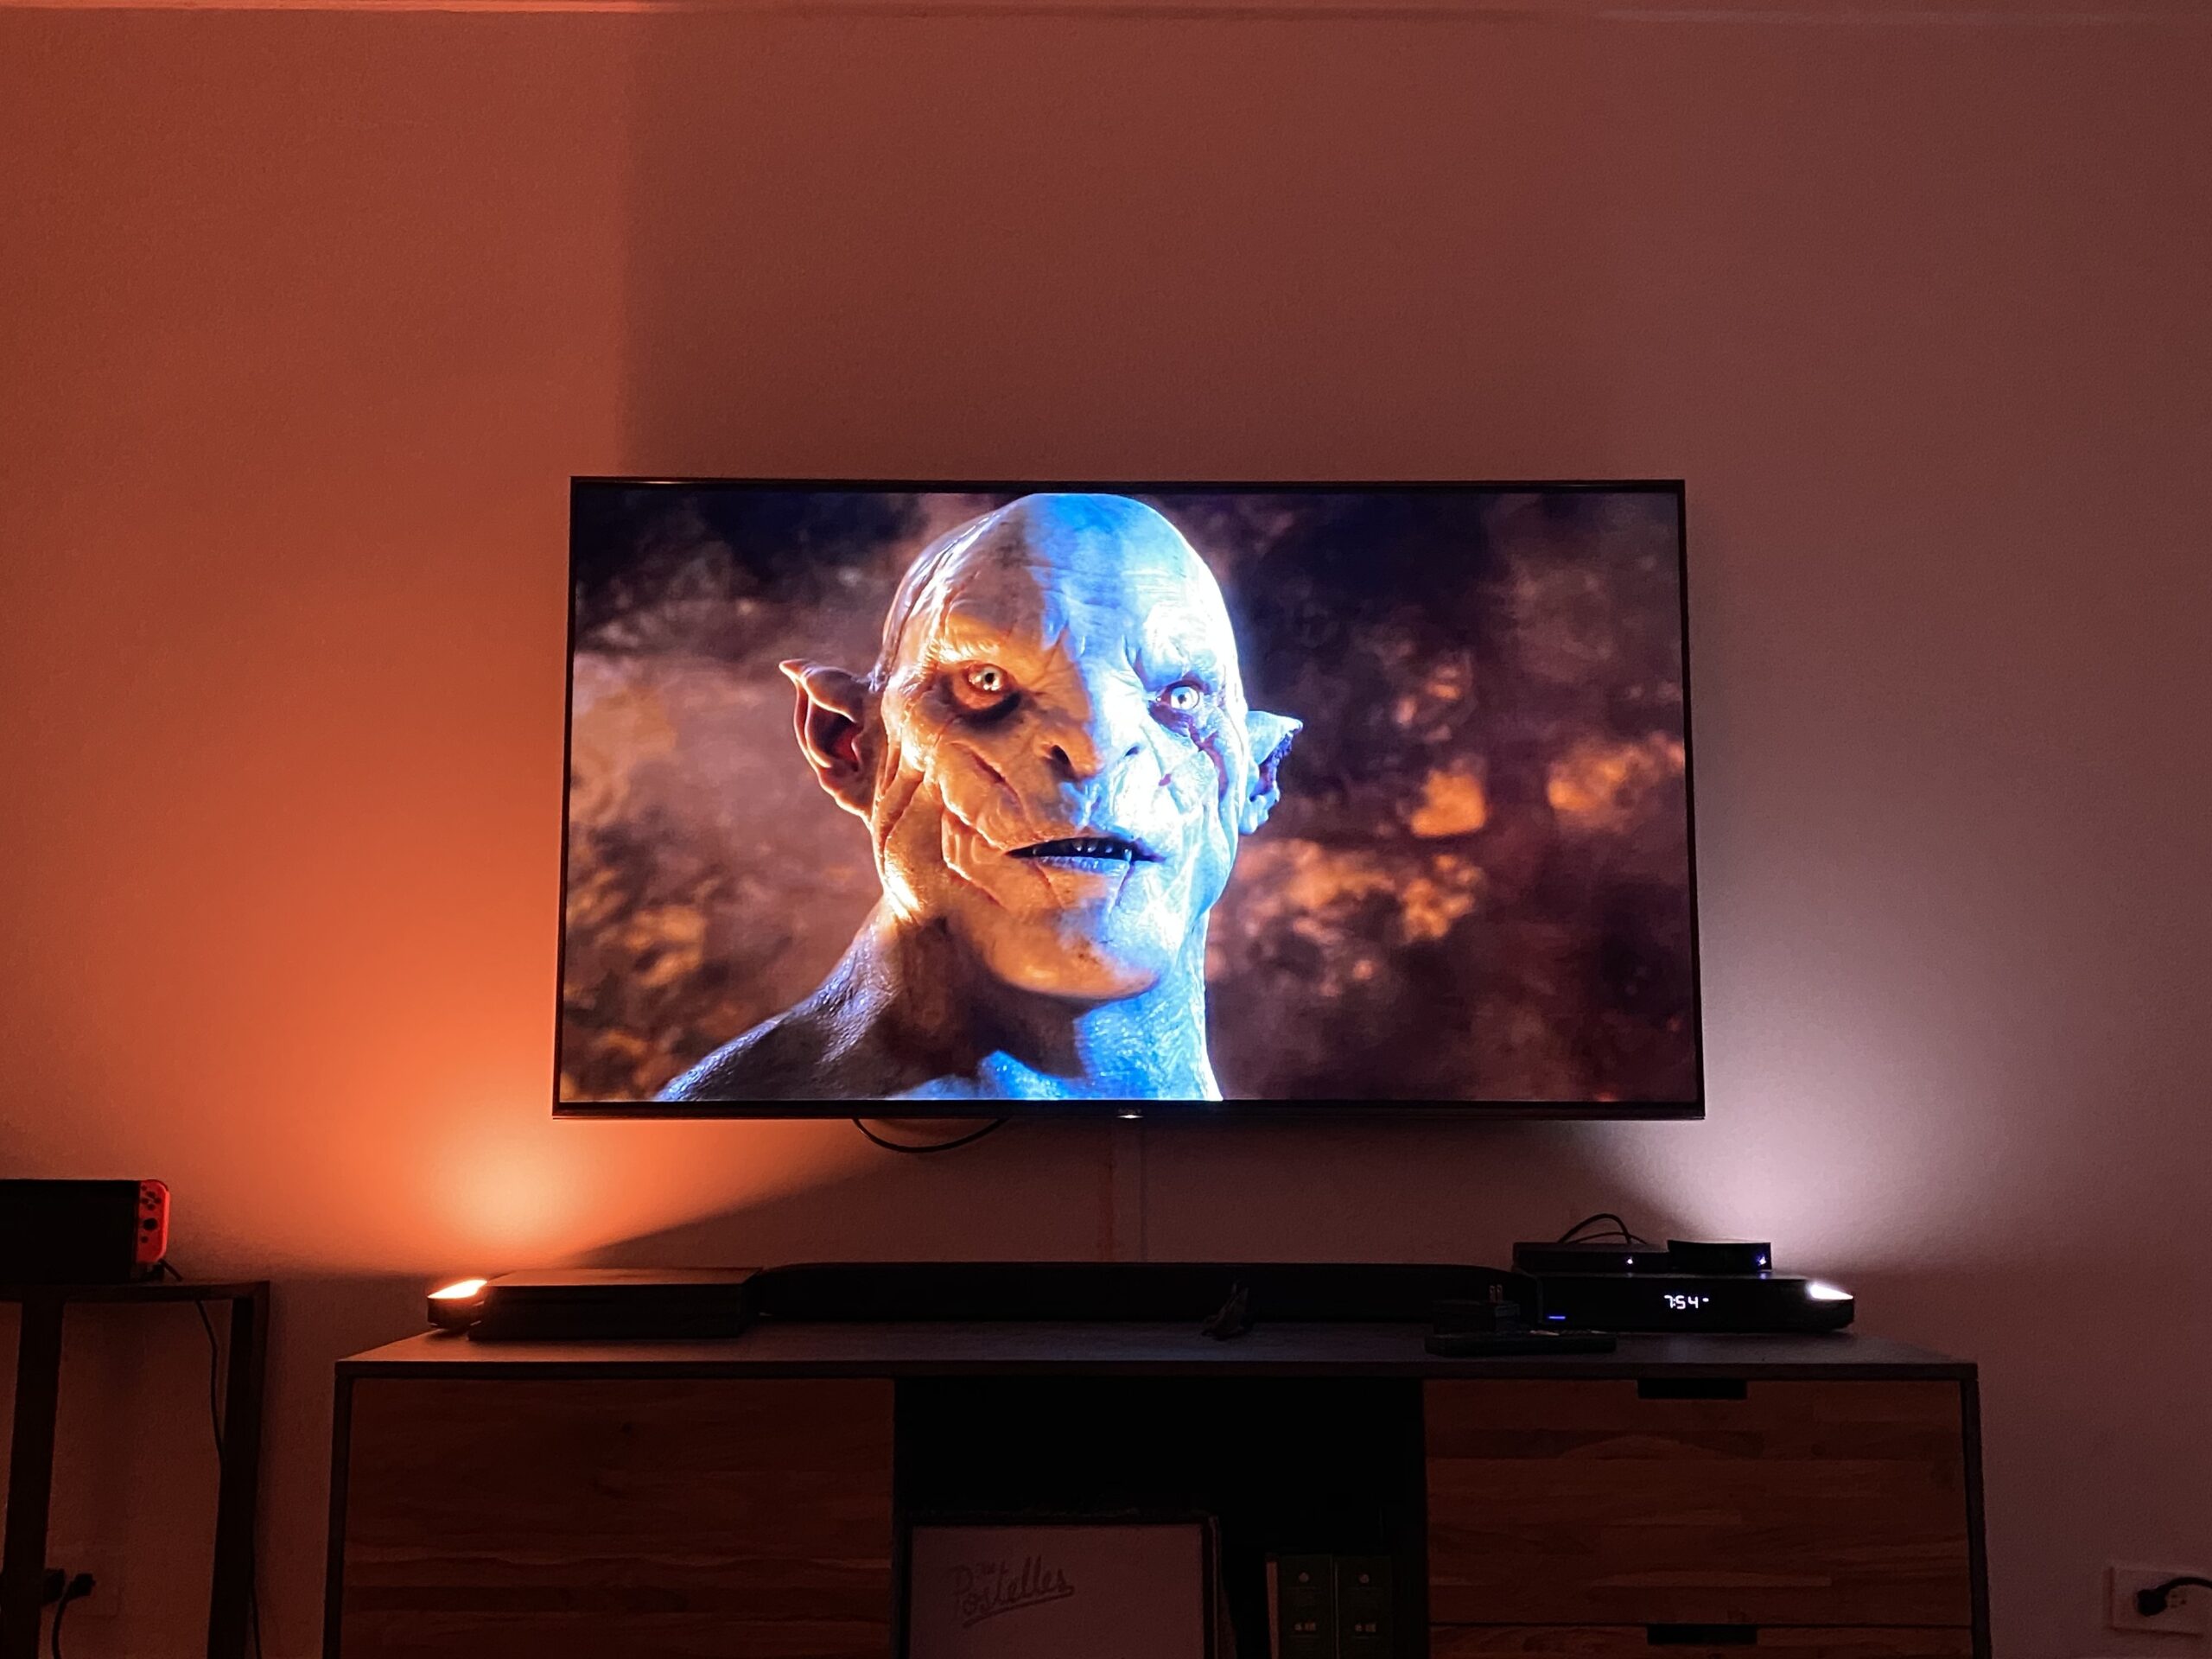 This awesome TV backlight kit glows the same colors as the images